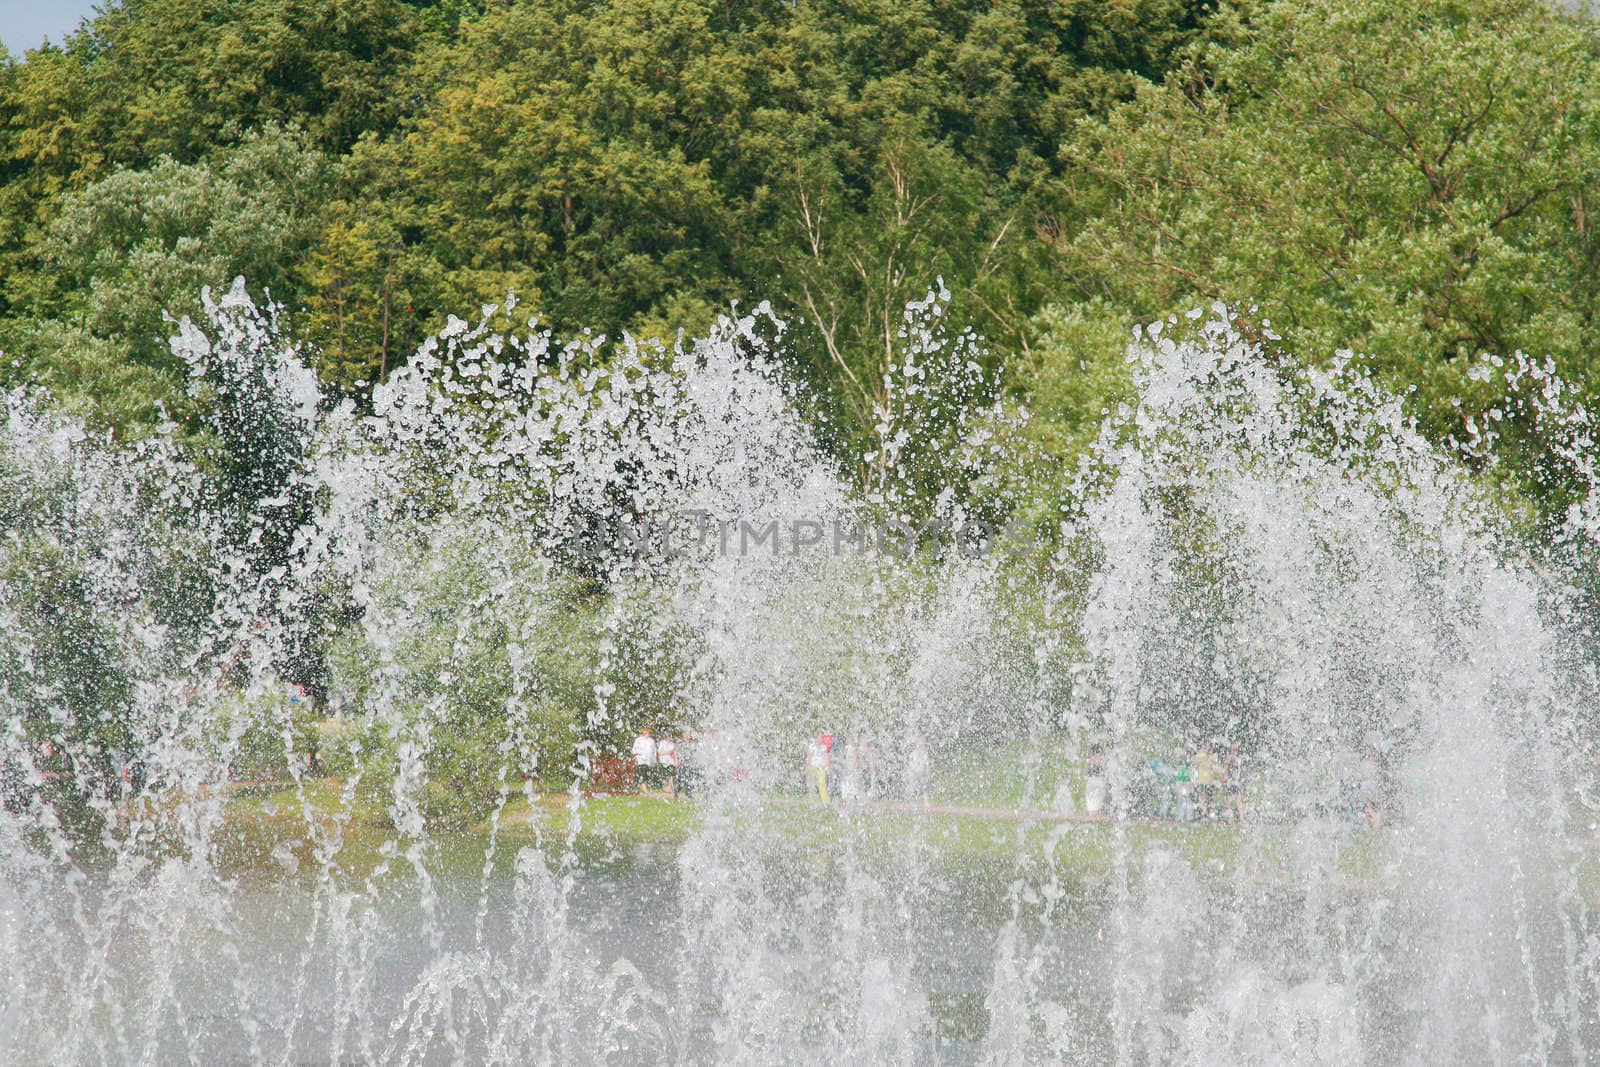 Jets of a fountain fly upwards in the afternoon